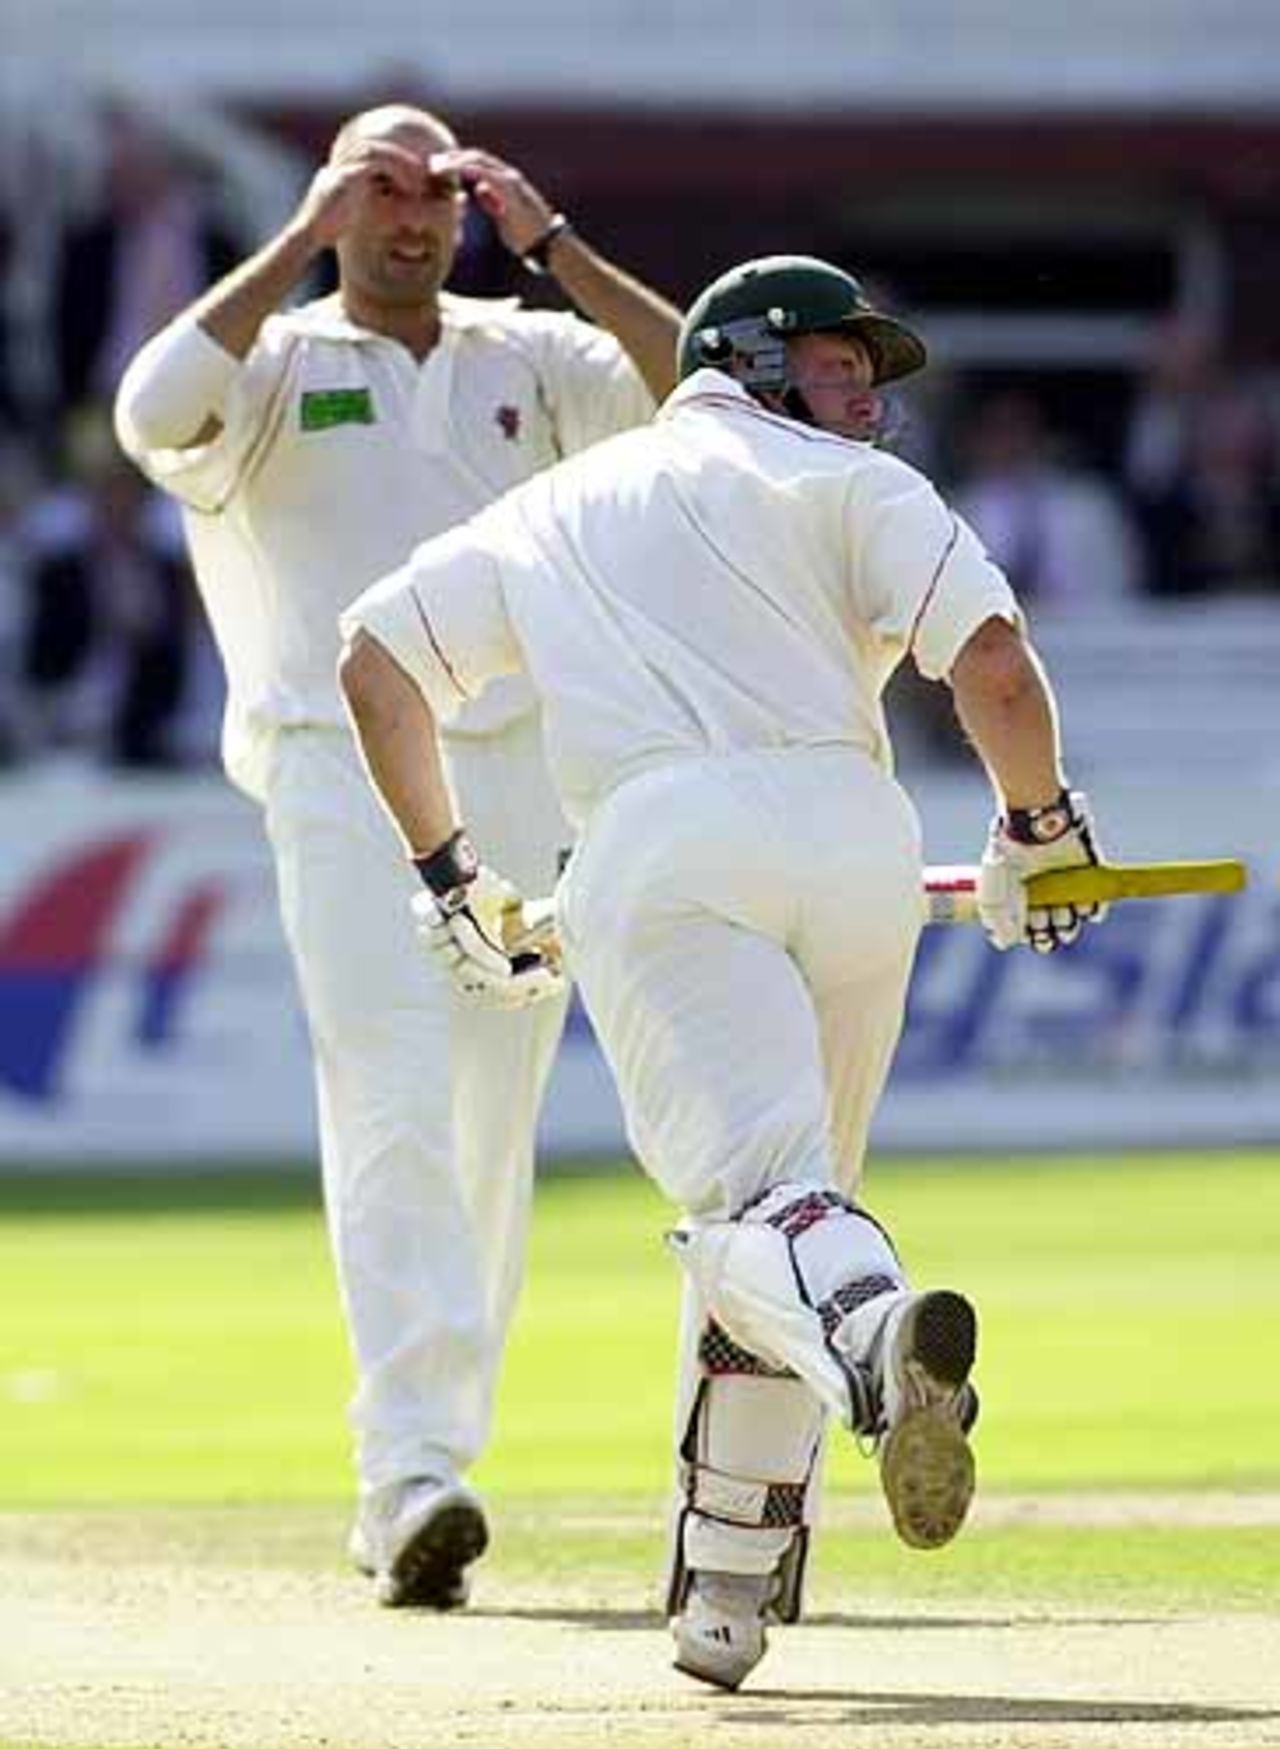 Bowler Richard Johnson in despair as Trevor Ward steps up the scoring in the Leics innings, C&G Trophy final, Lord's, Sat 1 Sep 2001